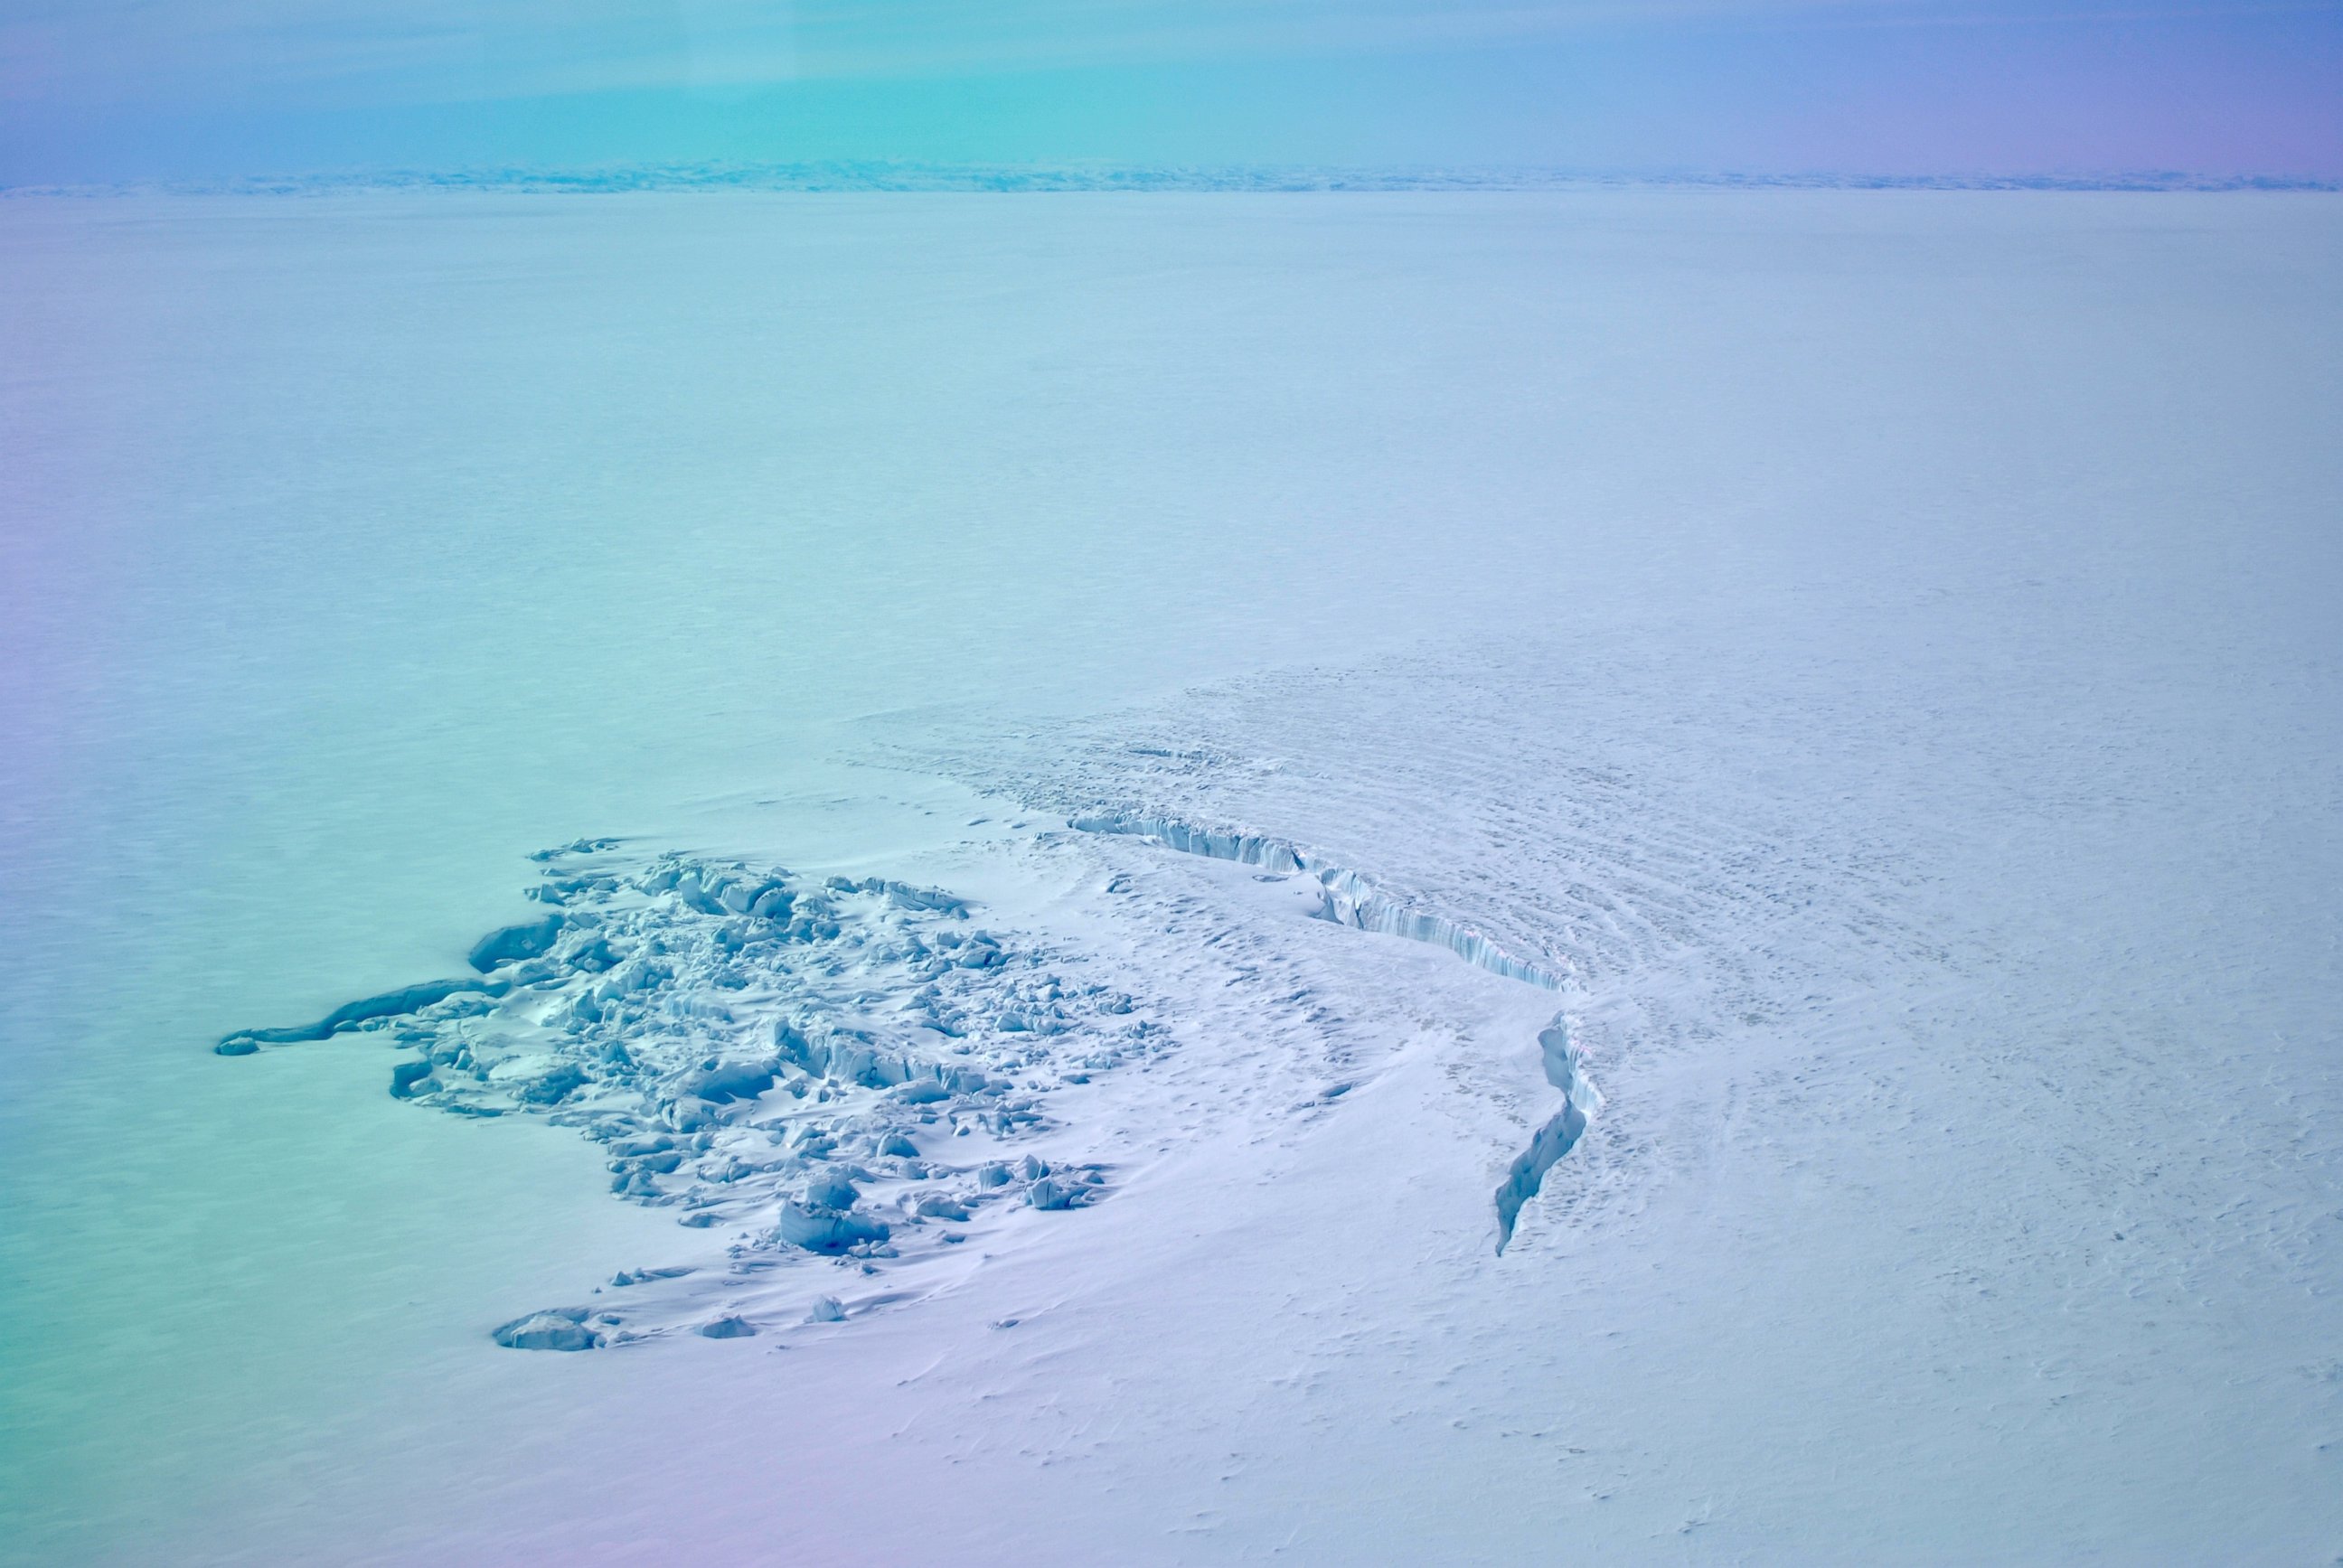 PHOTO: In April 2014, researchers flew over a site in southwest Greenland to find that a sub-glacial lake had drained away. This photo shows the crater left behind, as well as a deep crack in the ice. 